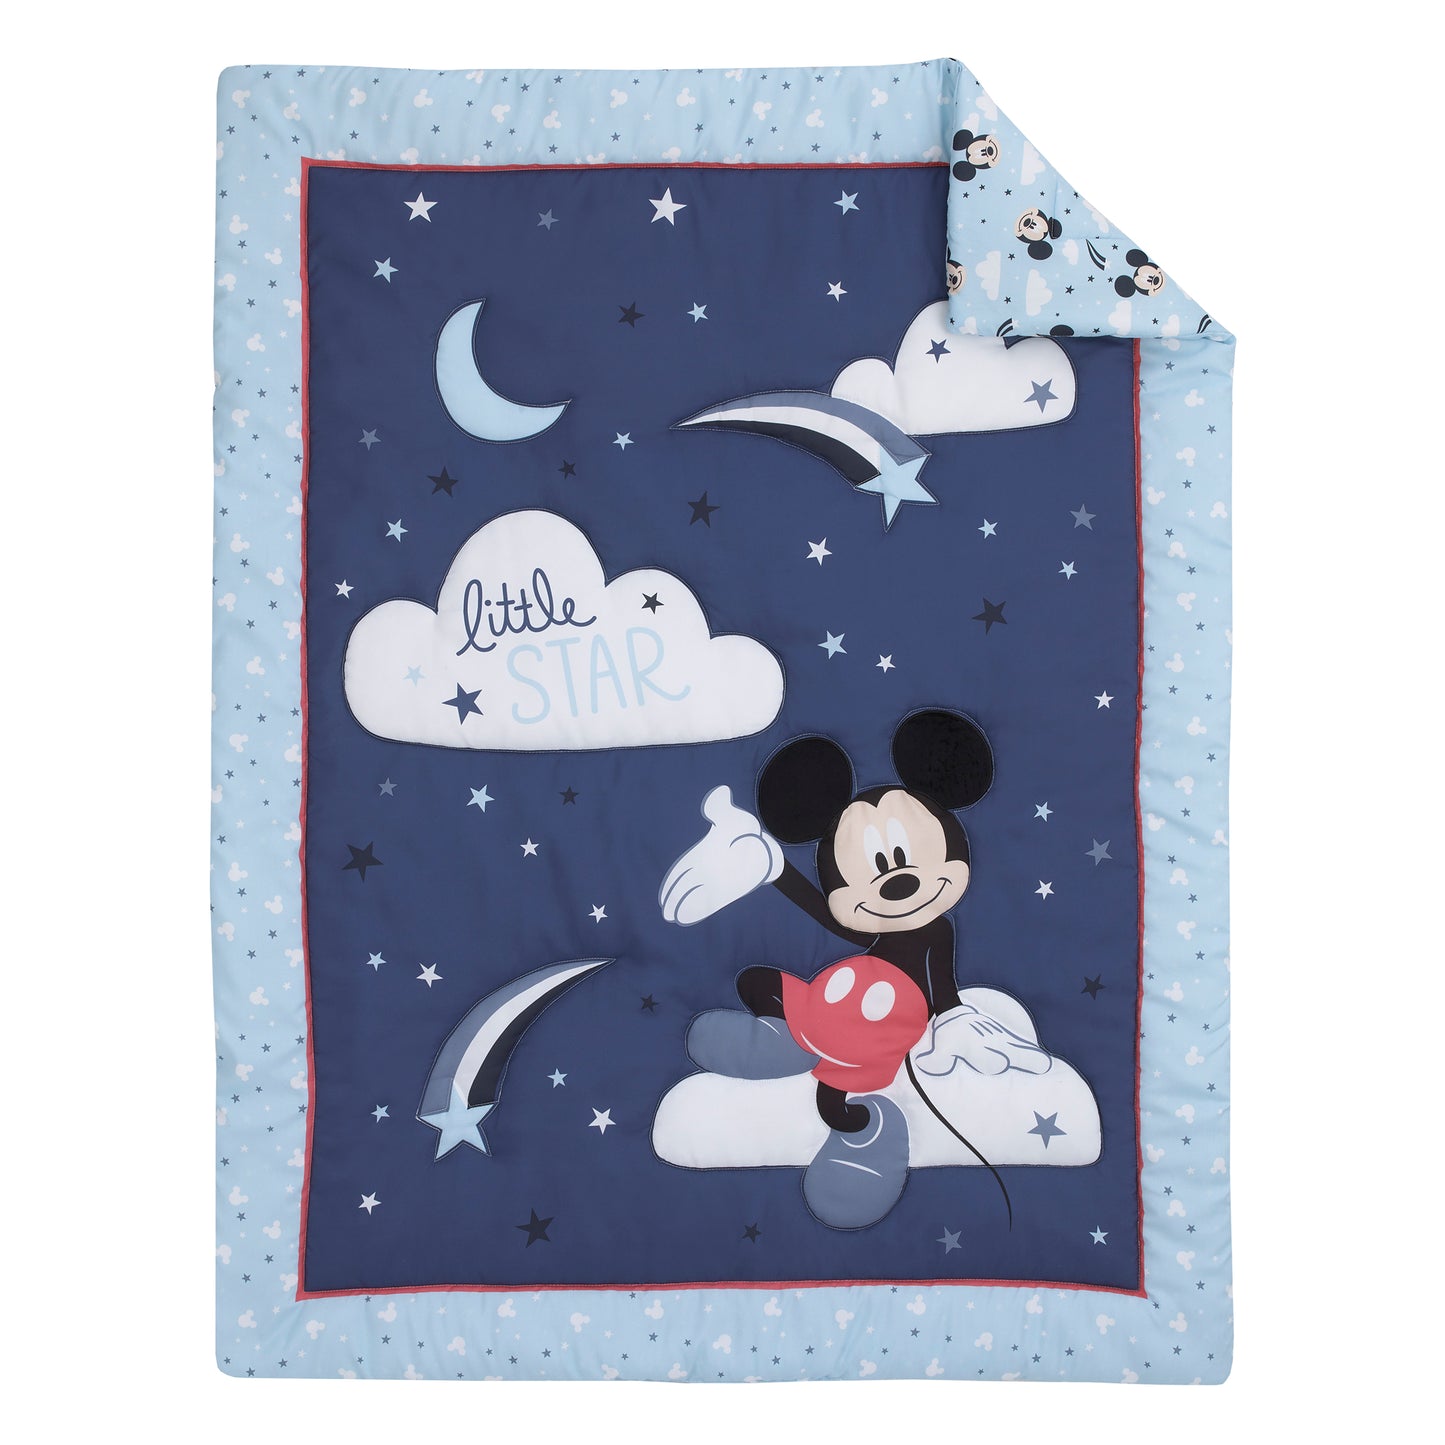 Disney Mickey Mouse Little Star Blue, Navy and White Cloud Moon and Stars 3 Piece Nursery Crib Bedding Set - Comforter, Fitted Crib Sheet, and Crib Skirt